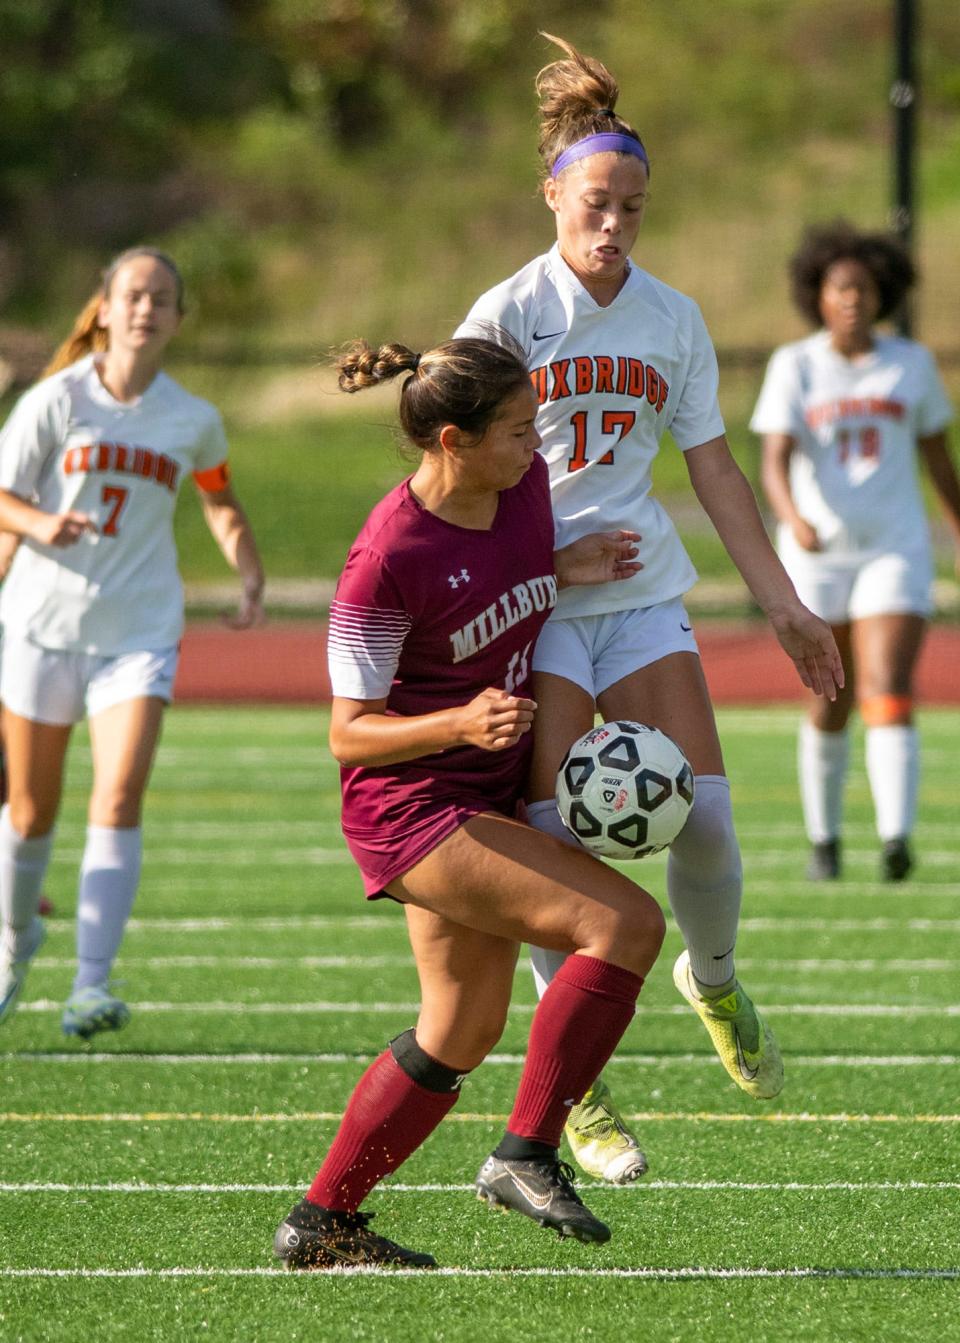 Millbury's Maya Bravo and Uxbridge's Kathryn Cahill go after a loose ball during Wednesday's game.